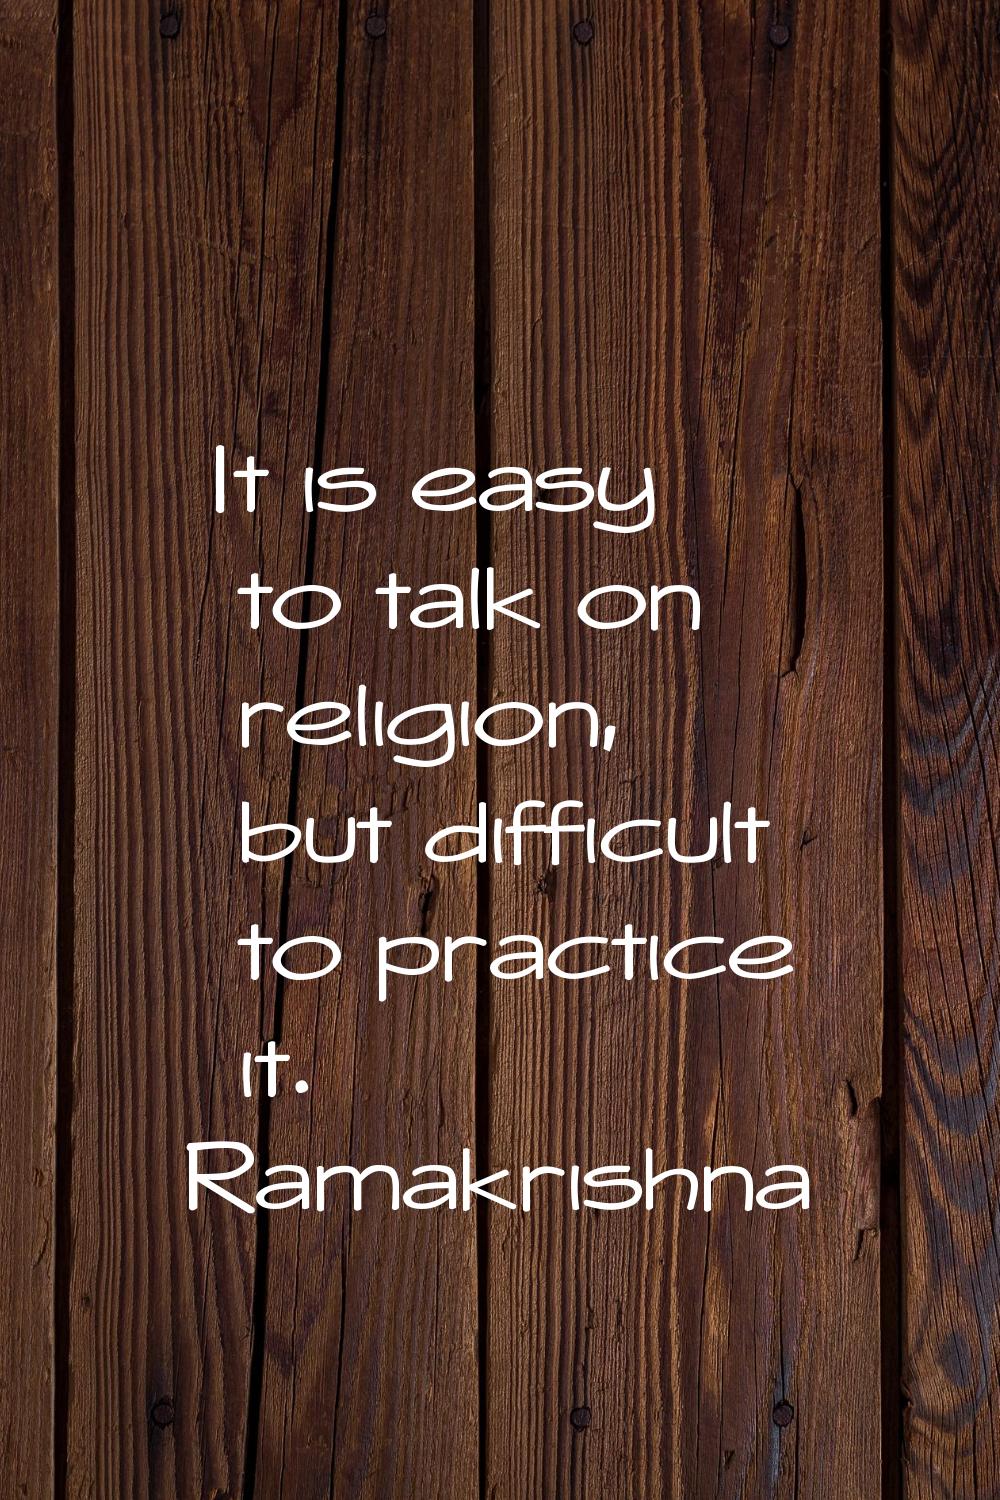 It is easy to talk on religion, but difficult to practice it.